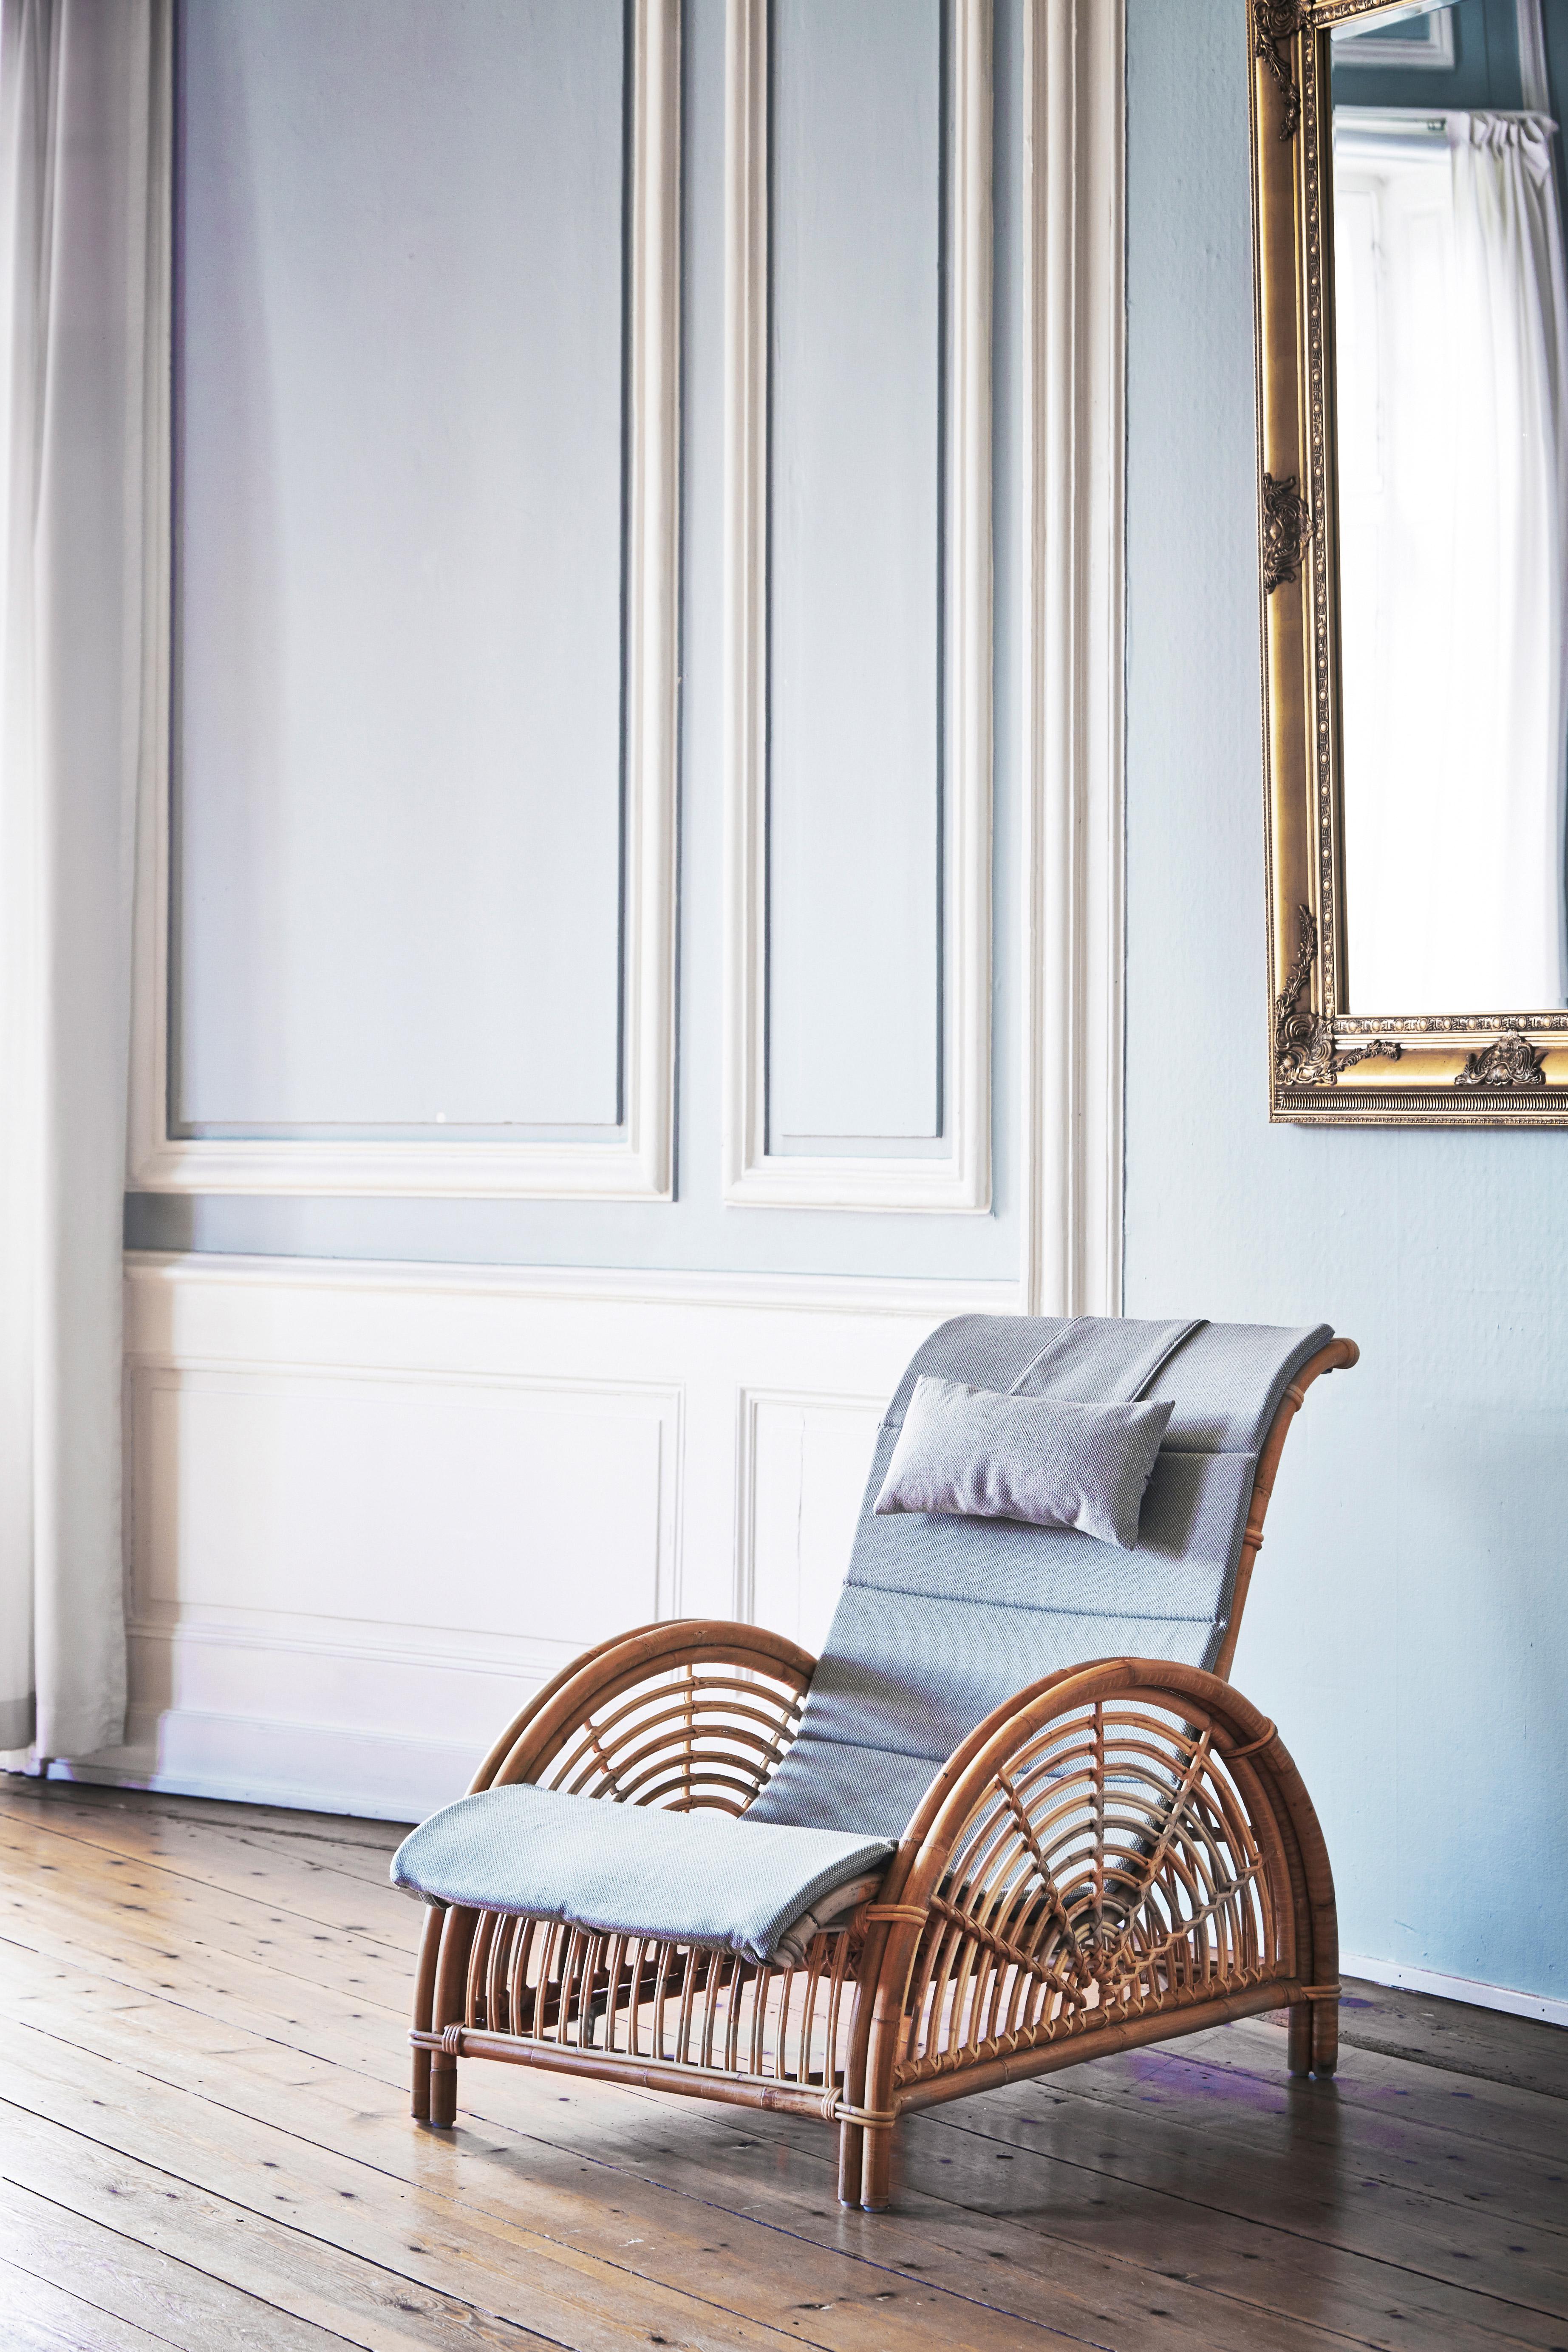 Arne Jacobsen designed the original Paris chair in 1925. This sculptural rattan piece was Jacobsen's first furniture design and won a silver medal at the Paris Art Deco Fair. This chair's striking curvature makes for an elegant and comfortable work